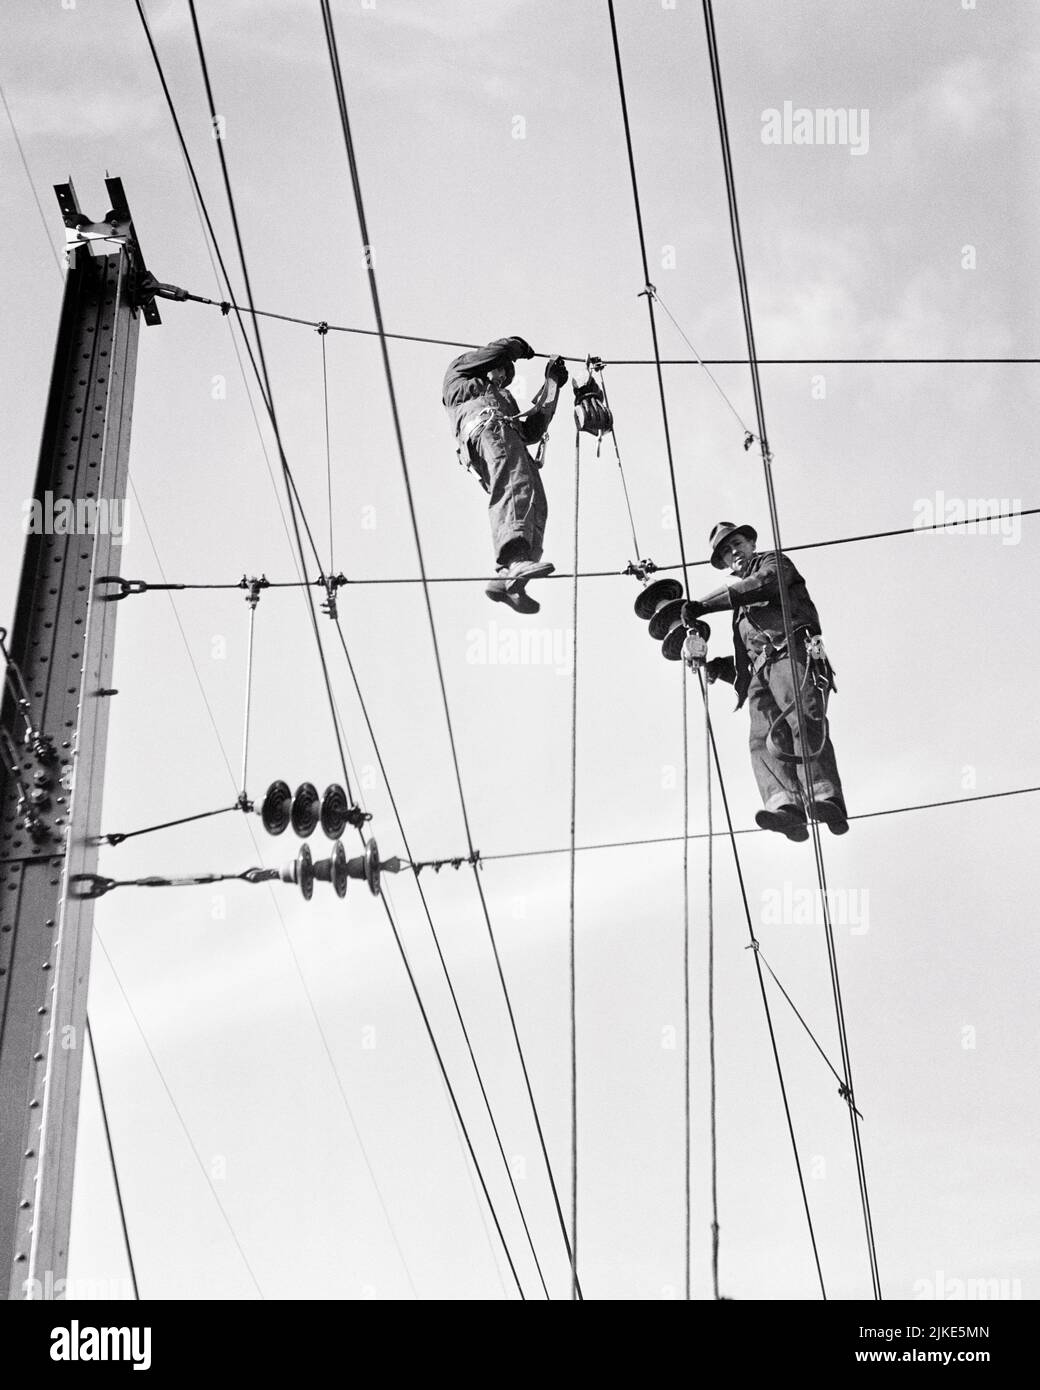 1930s TWO MEN ELECTRICAL CONSTRUCTION WORKERS CLIMBING STANDING ON WIRES ELECTRIFYING RAILROAD TRACK - i1693 HAR001 HARS SKILL OCCUPATION STRUCTURE SKILLS BUILD DANGEROUS STRENGTH COURAGE BASE CAREERS KNOWLEDGE LOW ANGLE PROGRESS RECOVERY LABOR PRIDE BETTER EMPLOYMENT LINES OCCUPATIONS CONCEPTUAL INFRASTRUCTURE EMPLOYEE FACILITIES COOPERATION CORE MID-ADULT MID-ADULT MAN PRECISION SYSTEMS BLACK AND WHITE CAUCASIAN ETHNICITY ECONOMY HAR001 LABORING OLD FASHIONED Stock Photo